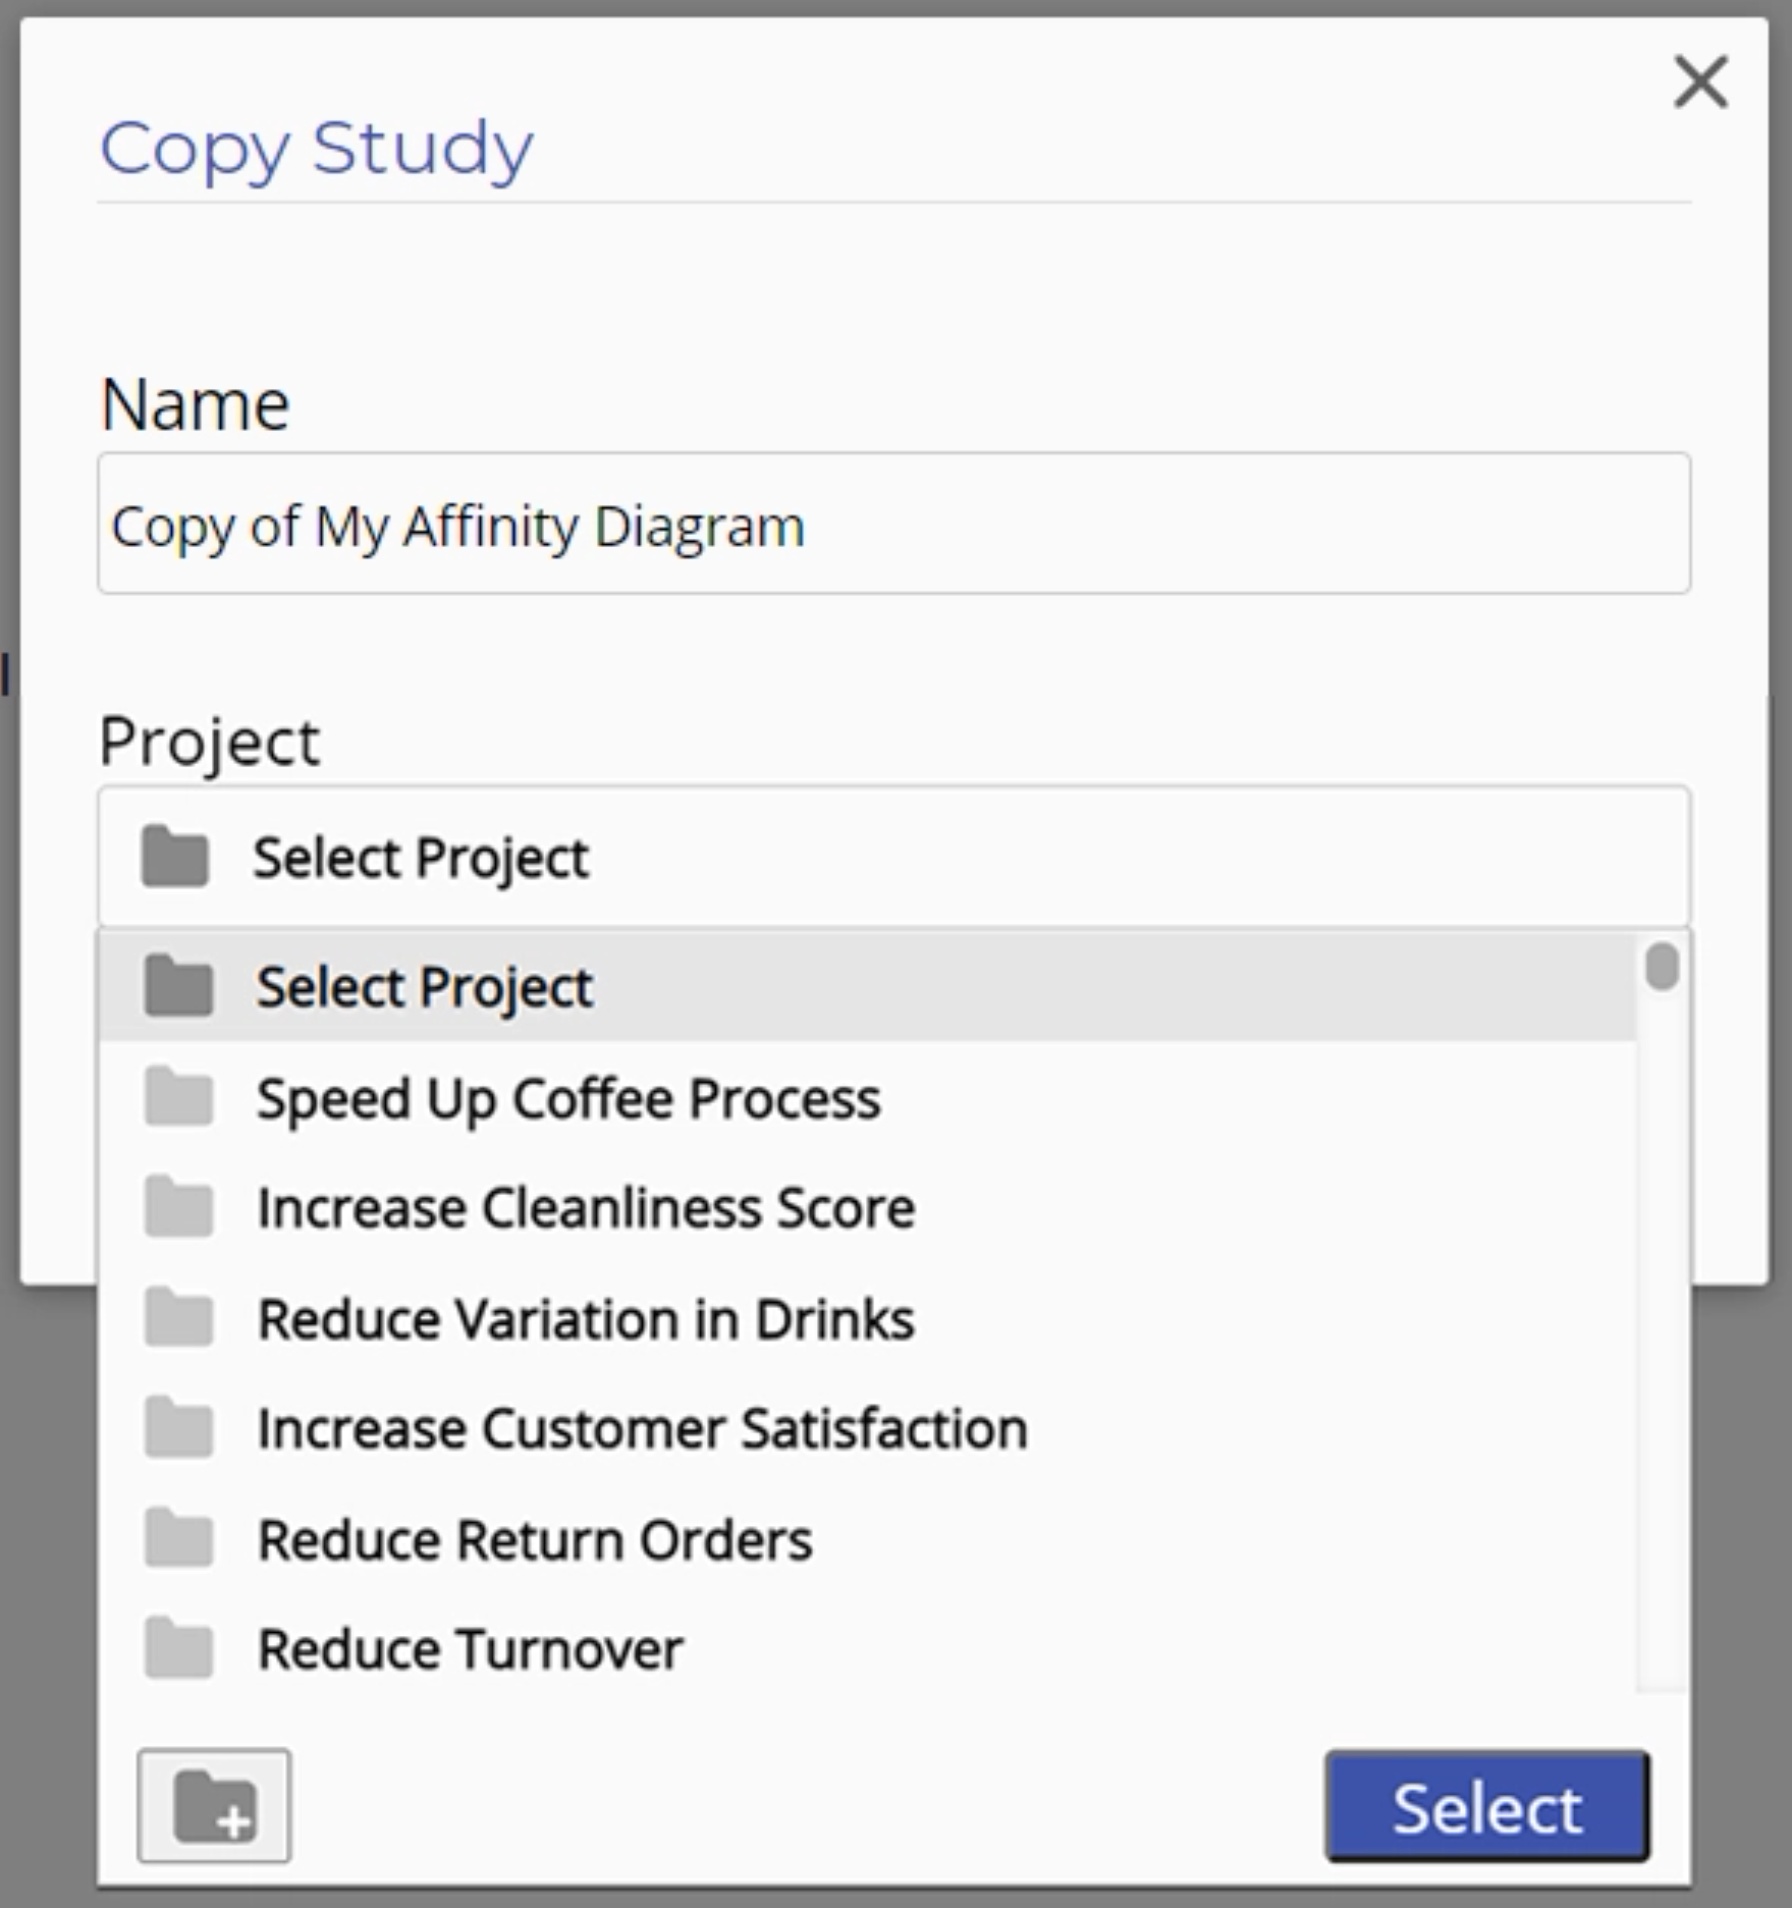 Choose which study to copy from dropdown.